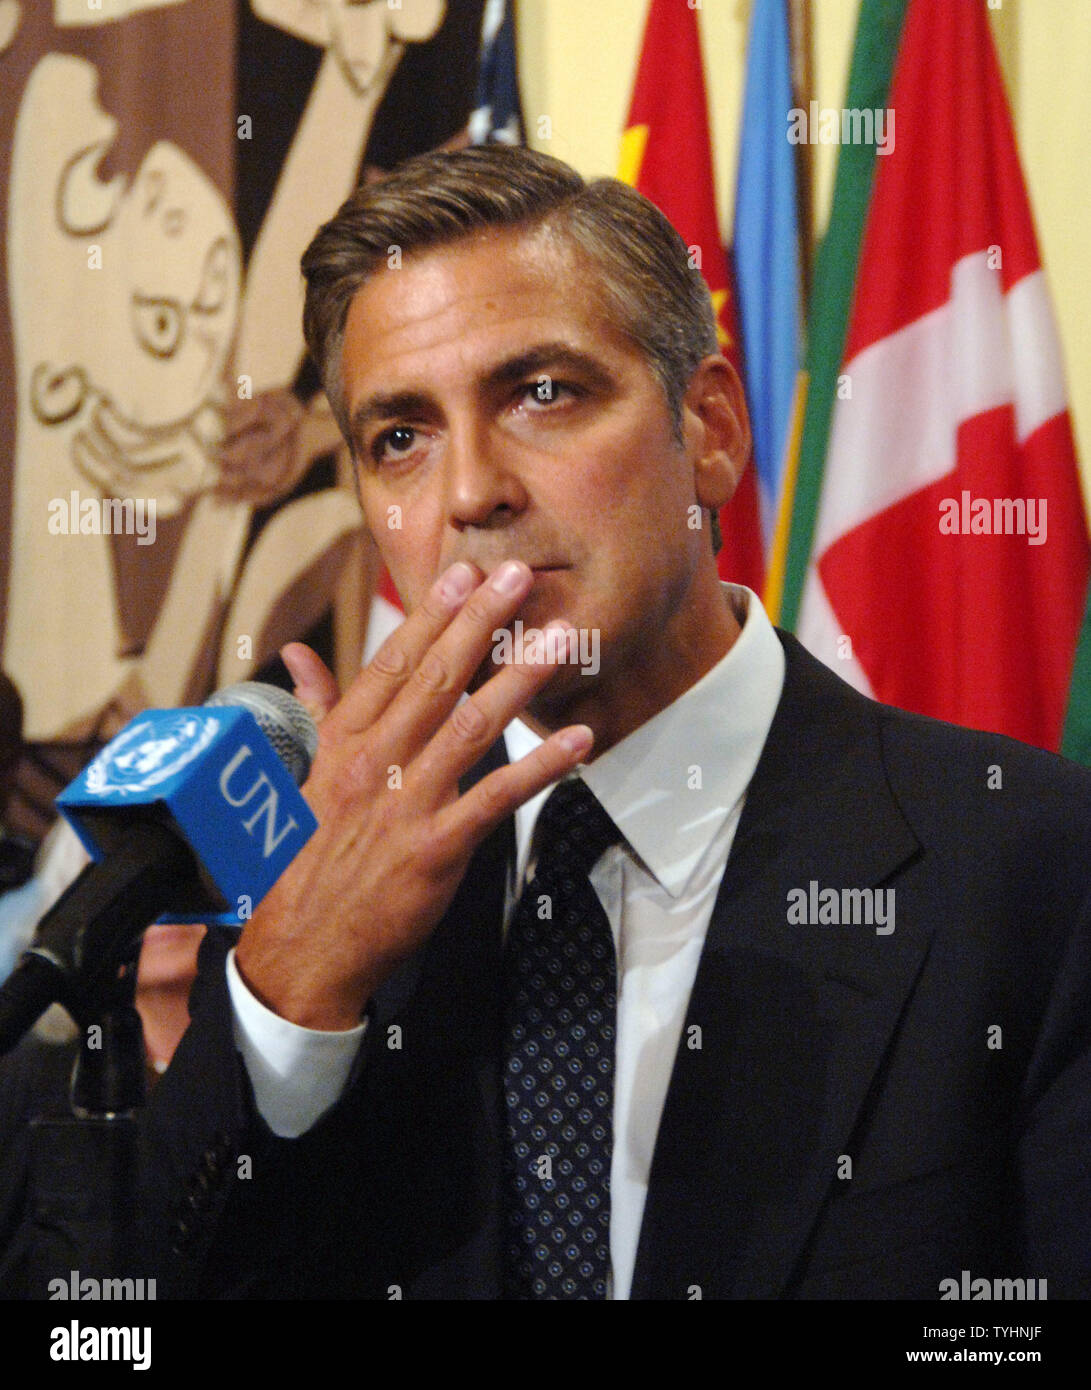 Actor/producer George Clooney ponders a question from the UN media after attending a 'Arria' style meeting of the United Nations Security Council members on the subject of Dafur, Sudan on September 14, 2006 in New York. The meeting was called for by the U.S. Mission to the UN and the Elie Wiesel Foundation.   (UPI Photo/Ezio Petersen) Stock Photo